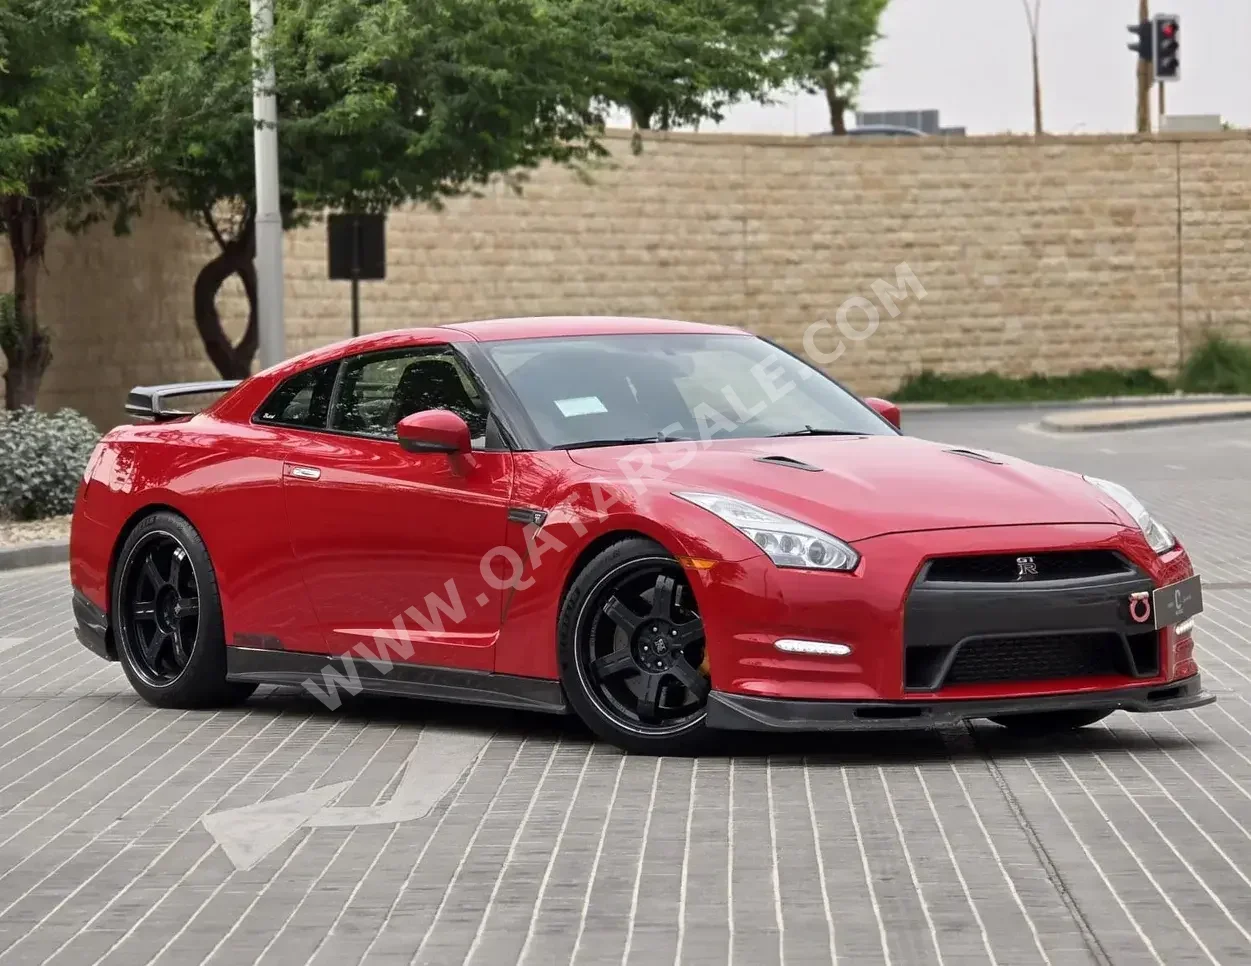 Nissan  GT-R  2015  Automatic  48,000 Km  6 Cylinder  Rear Wheel Drive (RWD)  Coupe / Sport  Red